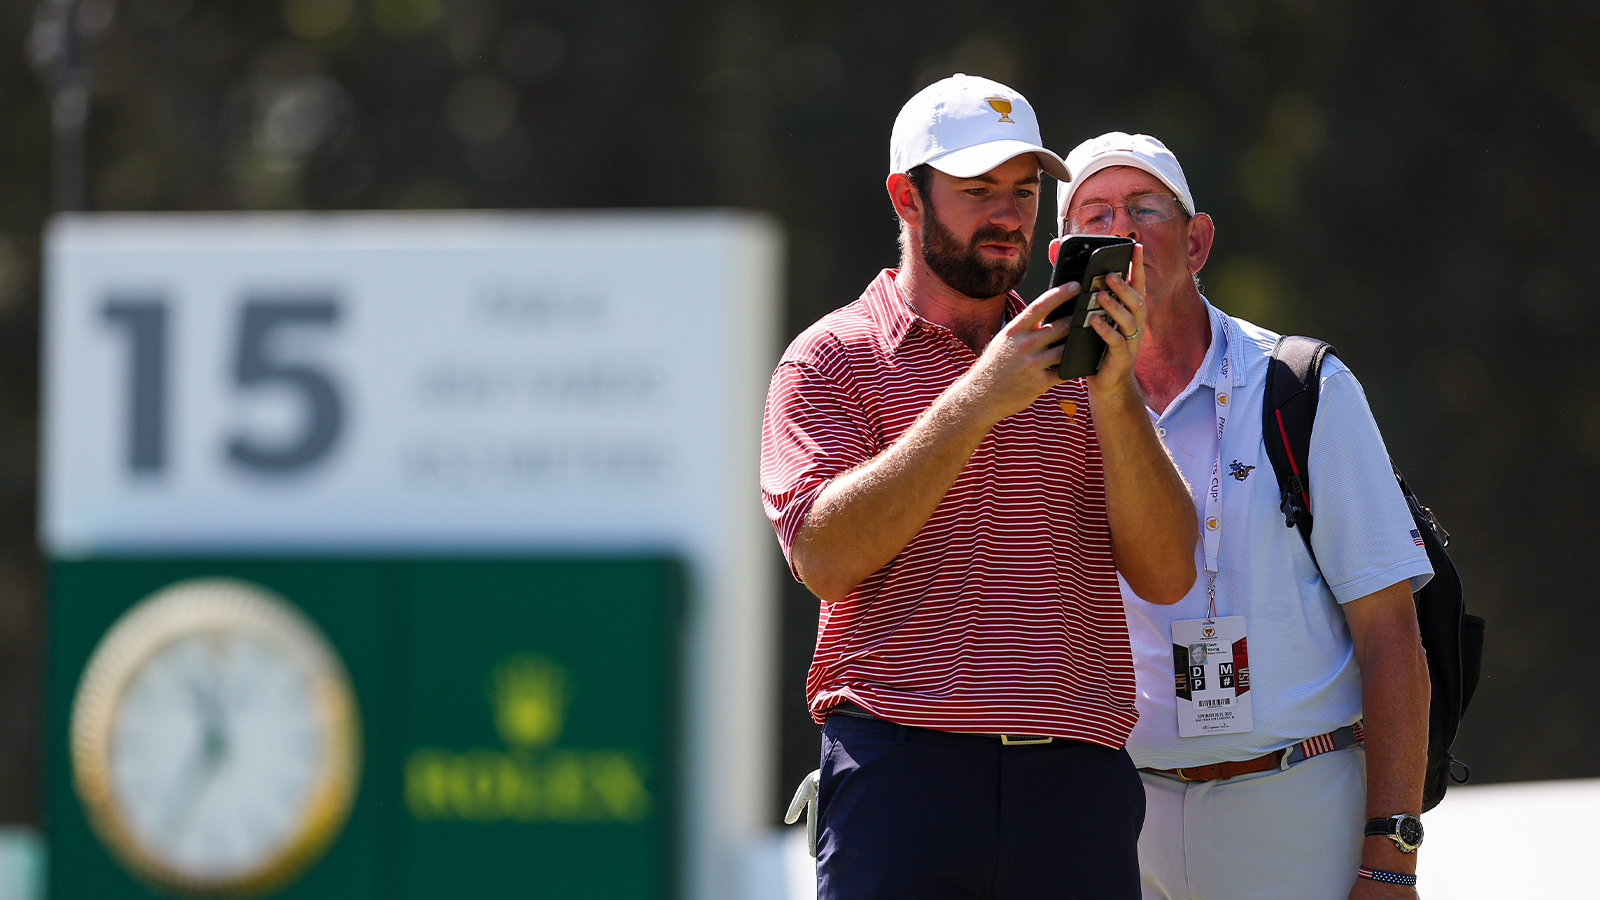 Cameron Young of the United States Team talks with his father Dave Young on the 15th tee during a practice round prior to the 2022 Presidents Cup at Quail Hollow Country Club on September 20, 2022 in Charlotte, North Carolina. (Photo by Rob Carr/Getty Images)